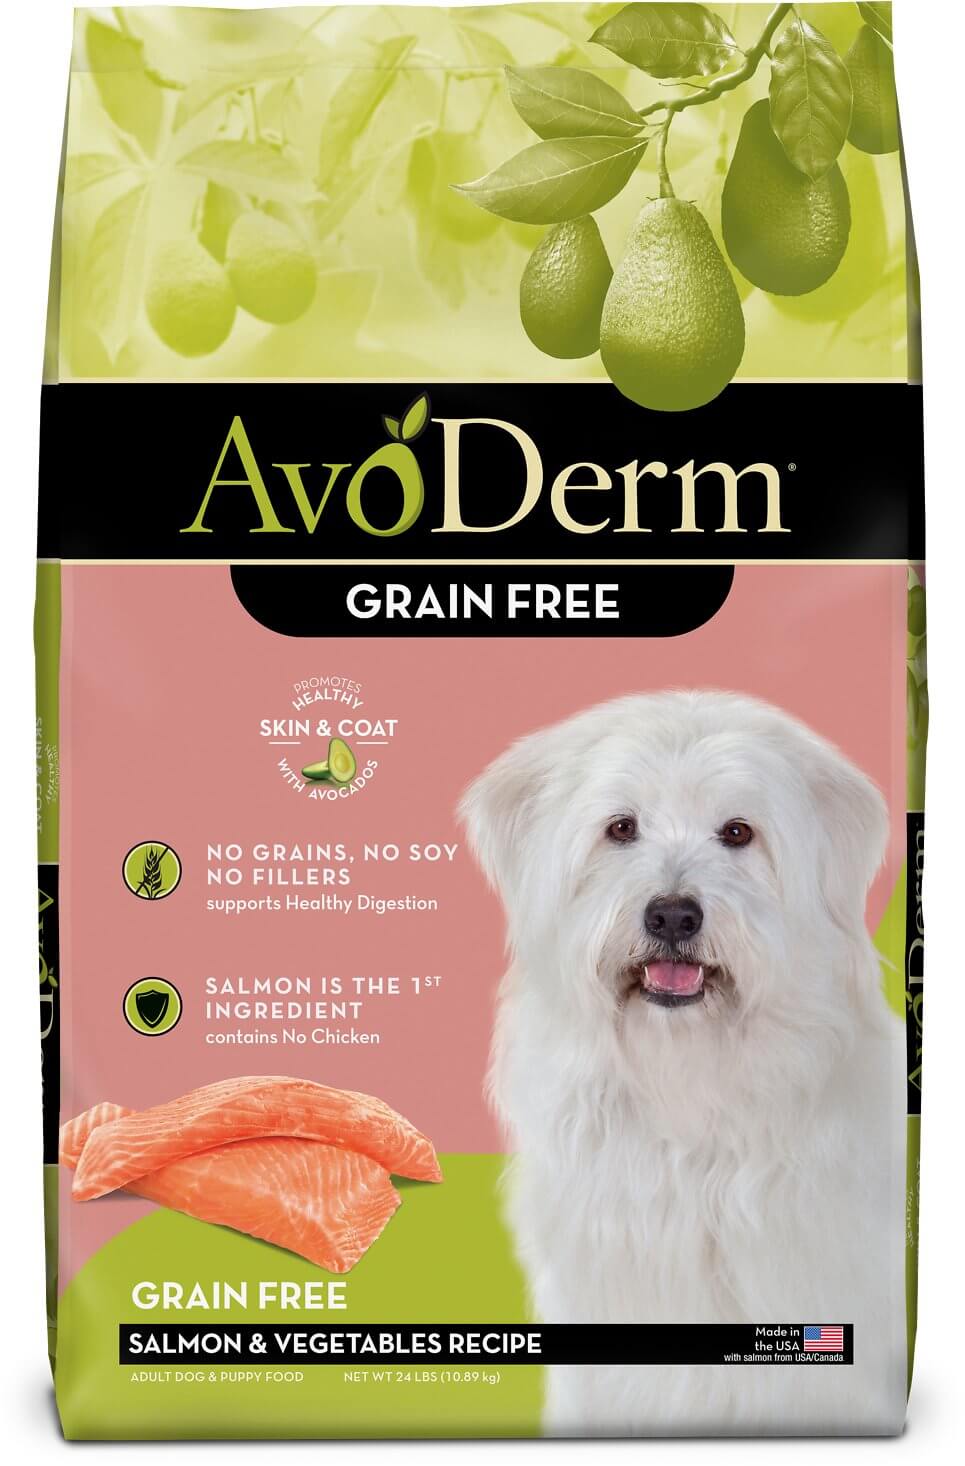 AvoDerm Natural Grain Free Dog Food Review (Dry)